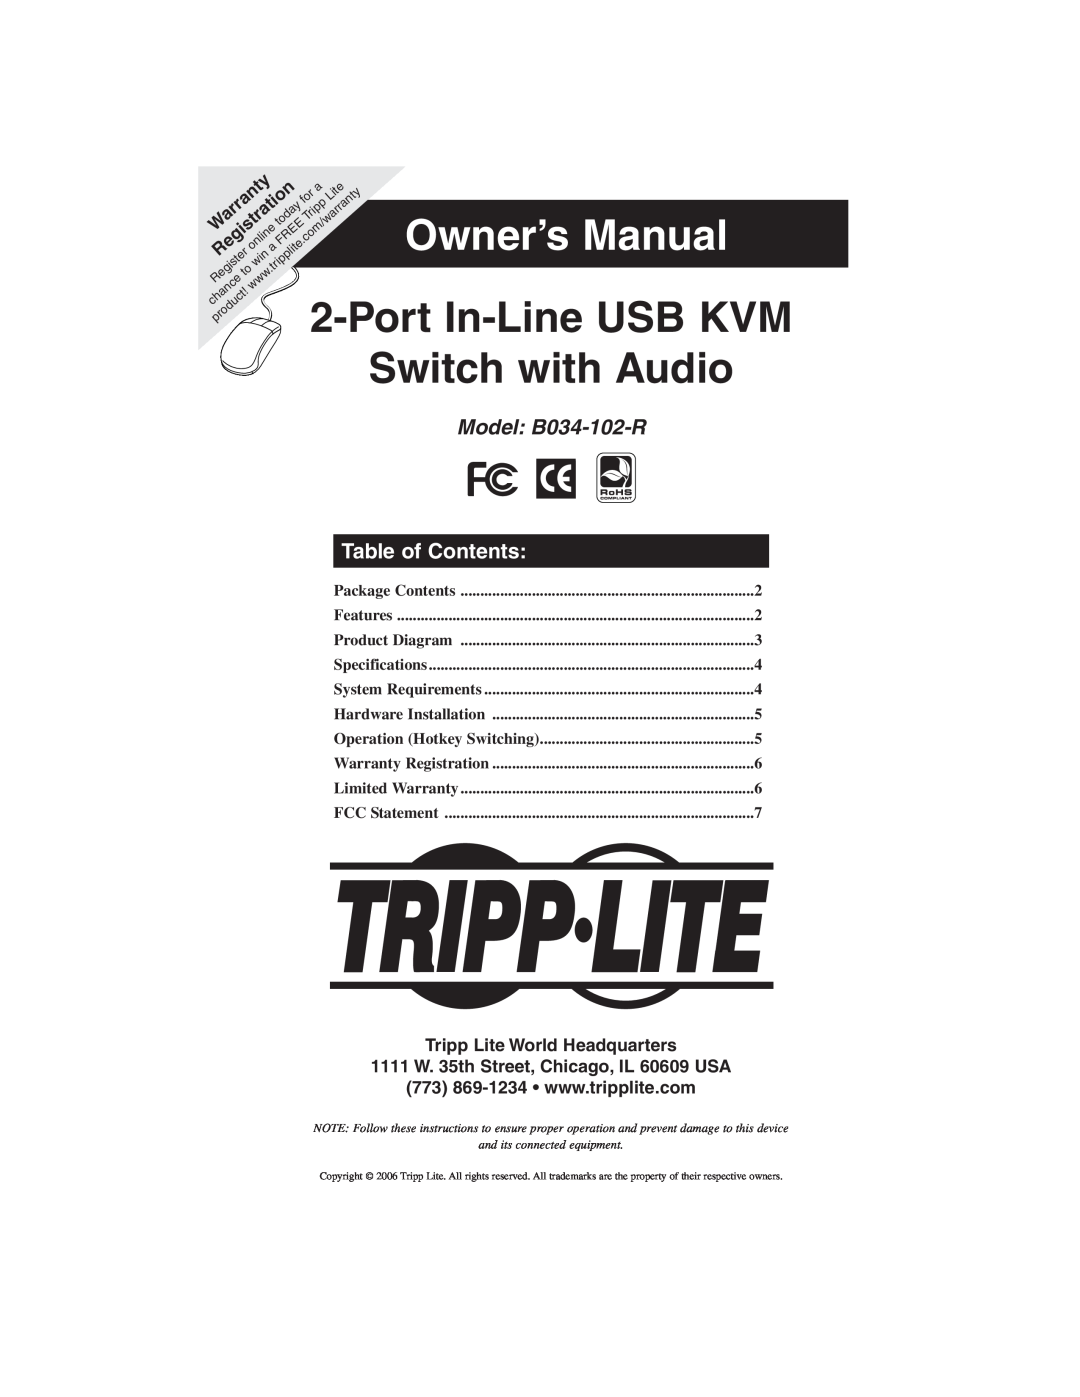 Tripp Lite B034-102-R owner manual Table of Contents, Tripp Lite World Headquarters, Owner’s Manual, Port In-Line USB KVM 